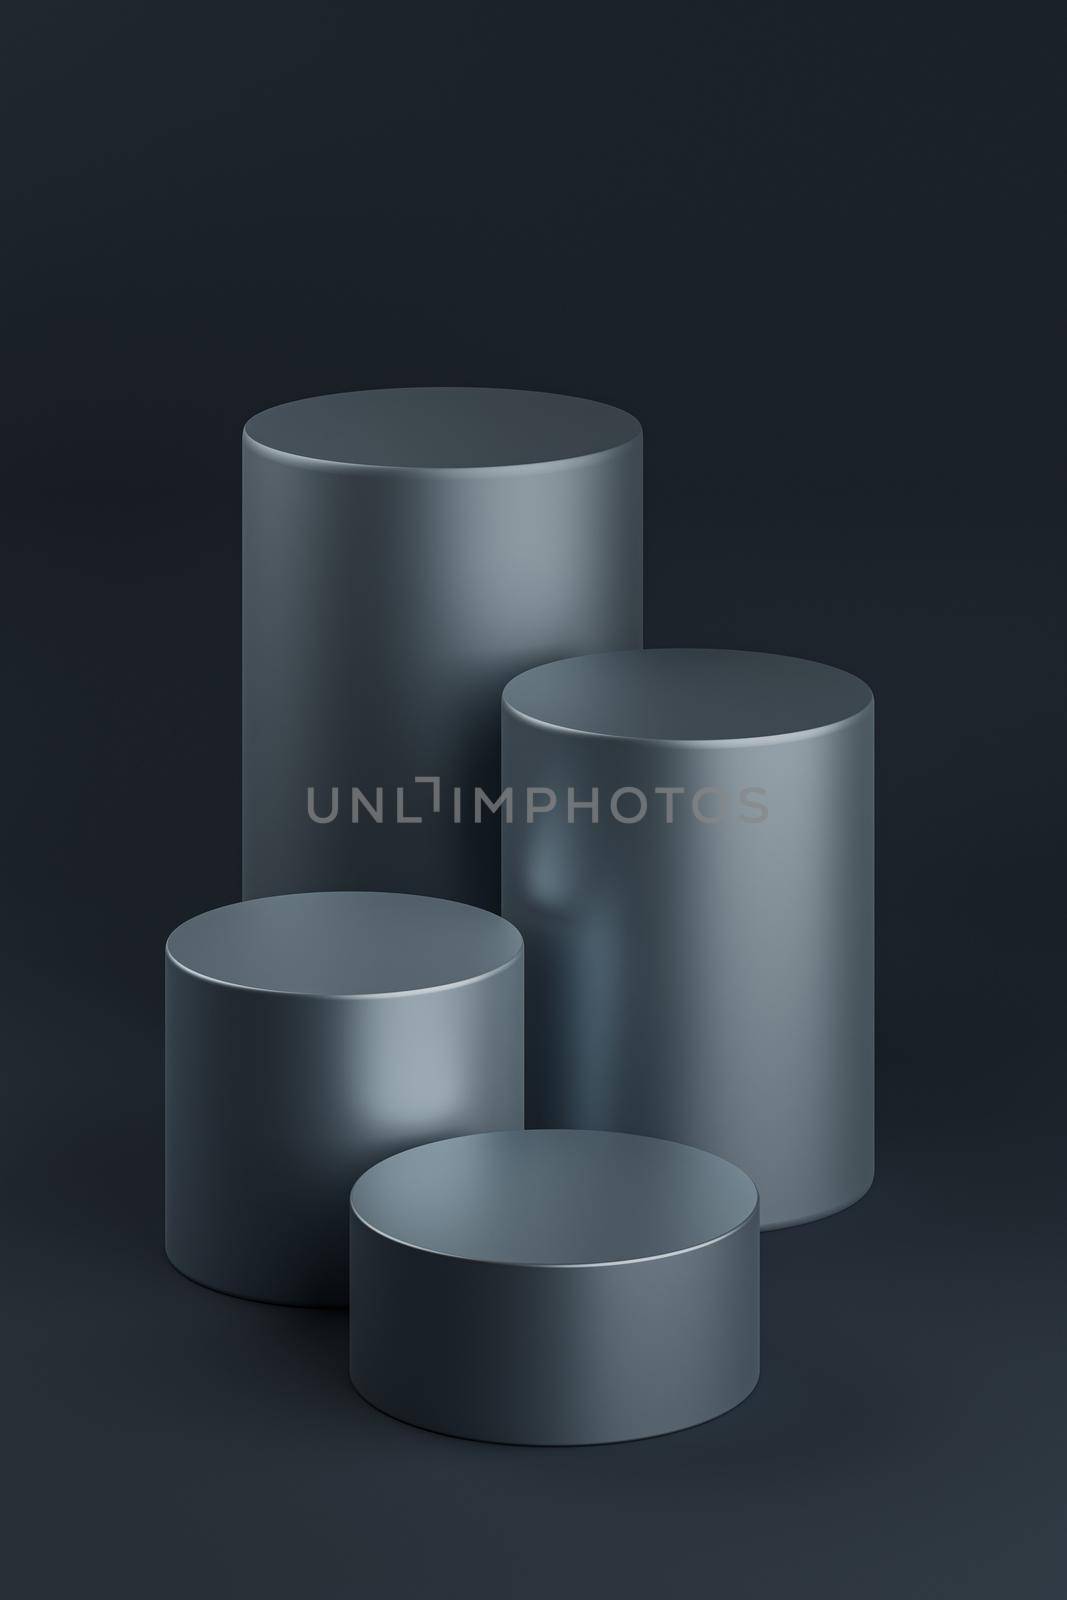 Dark blue cylinder stand or pedestal for products. 3D rendering in minimal style.